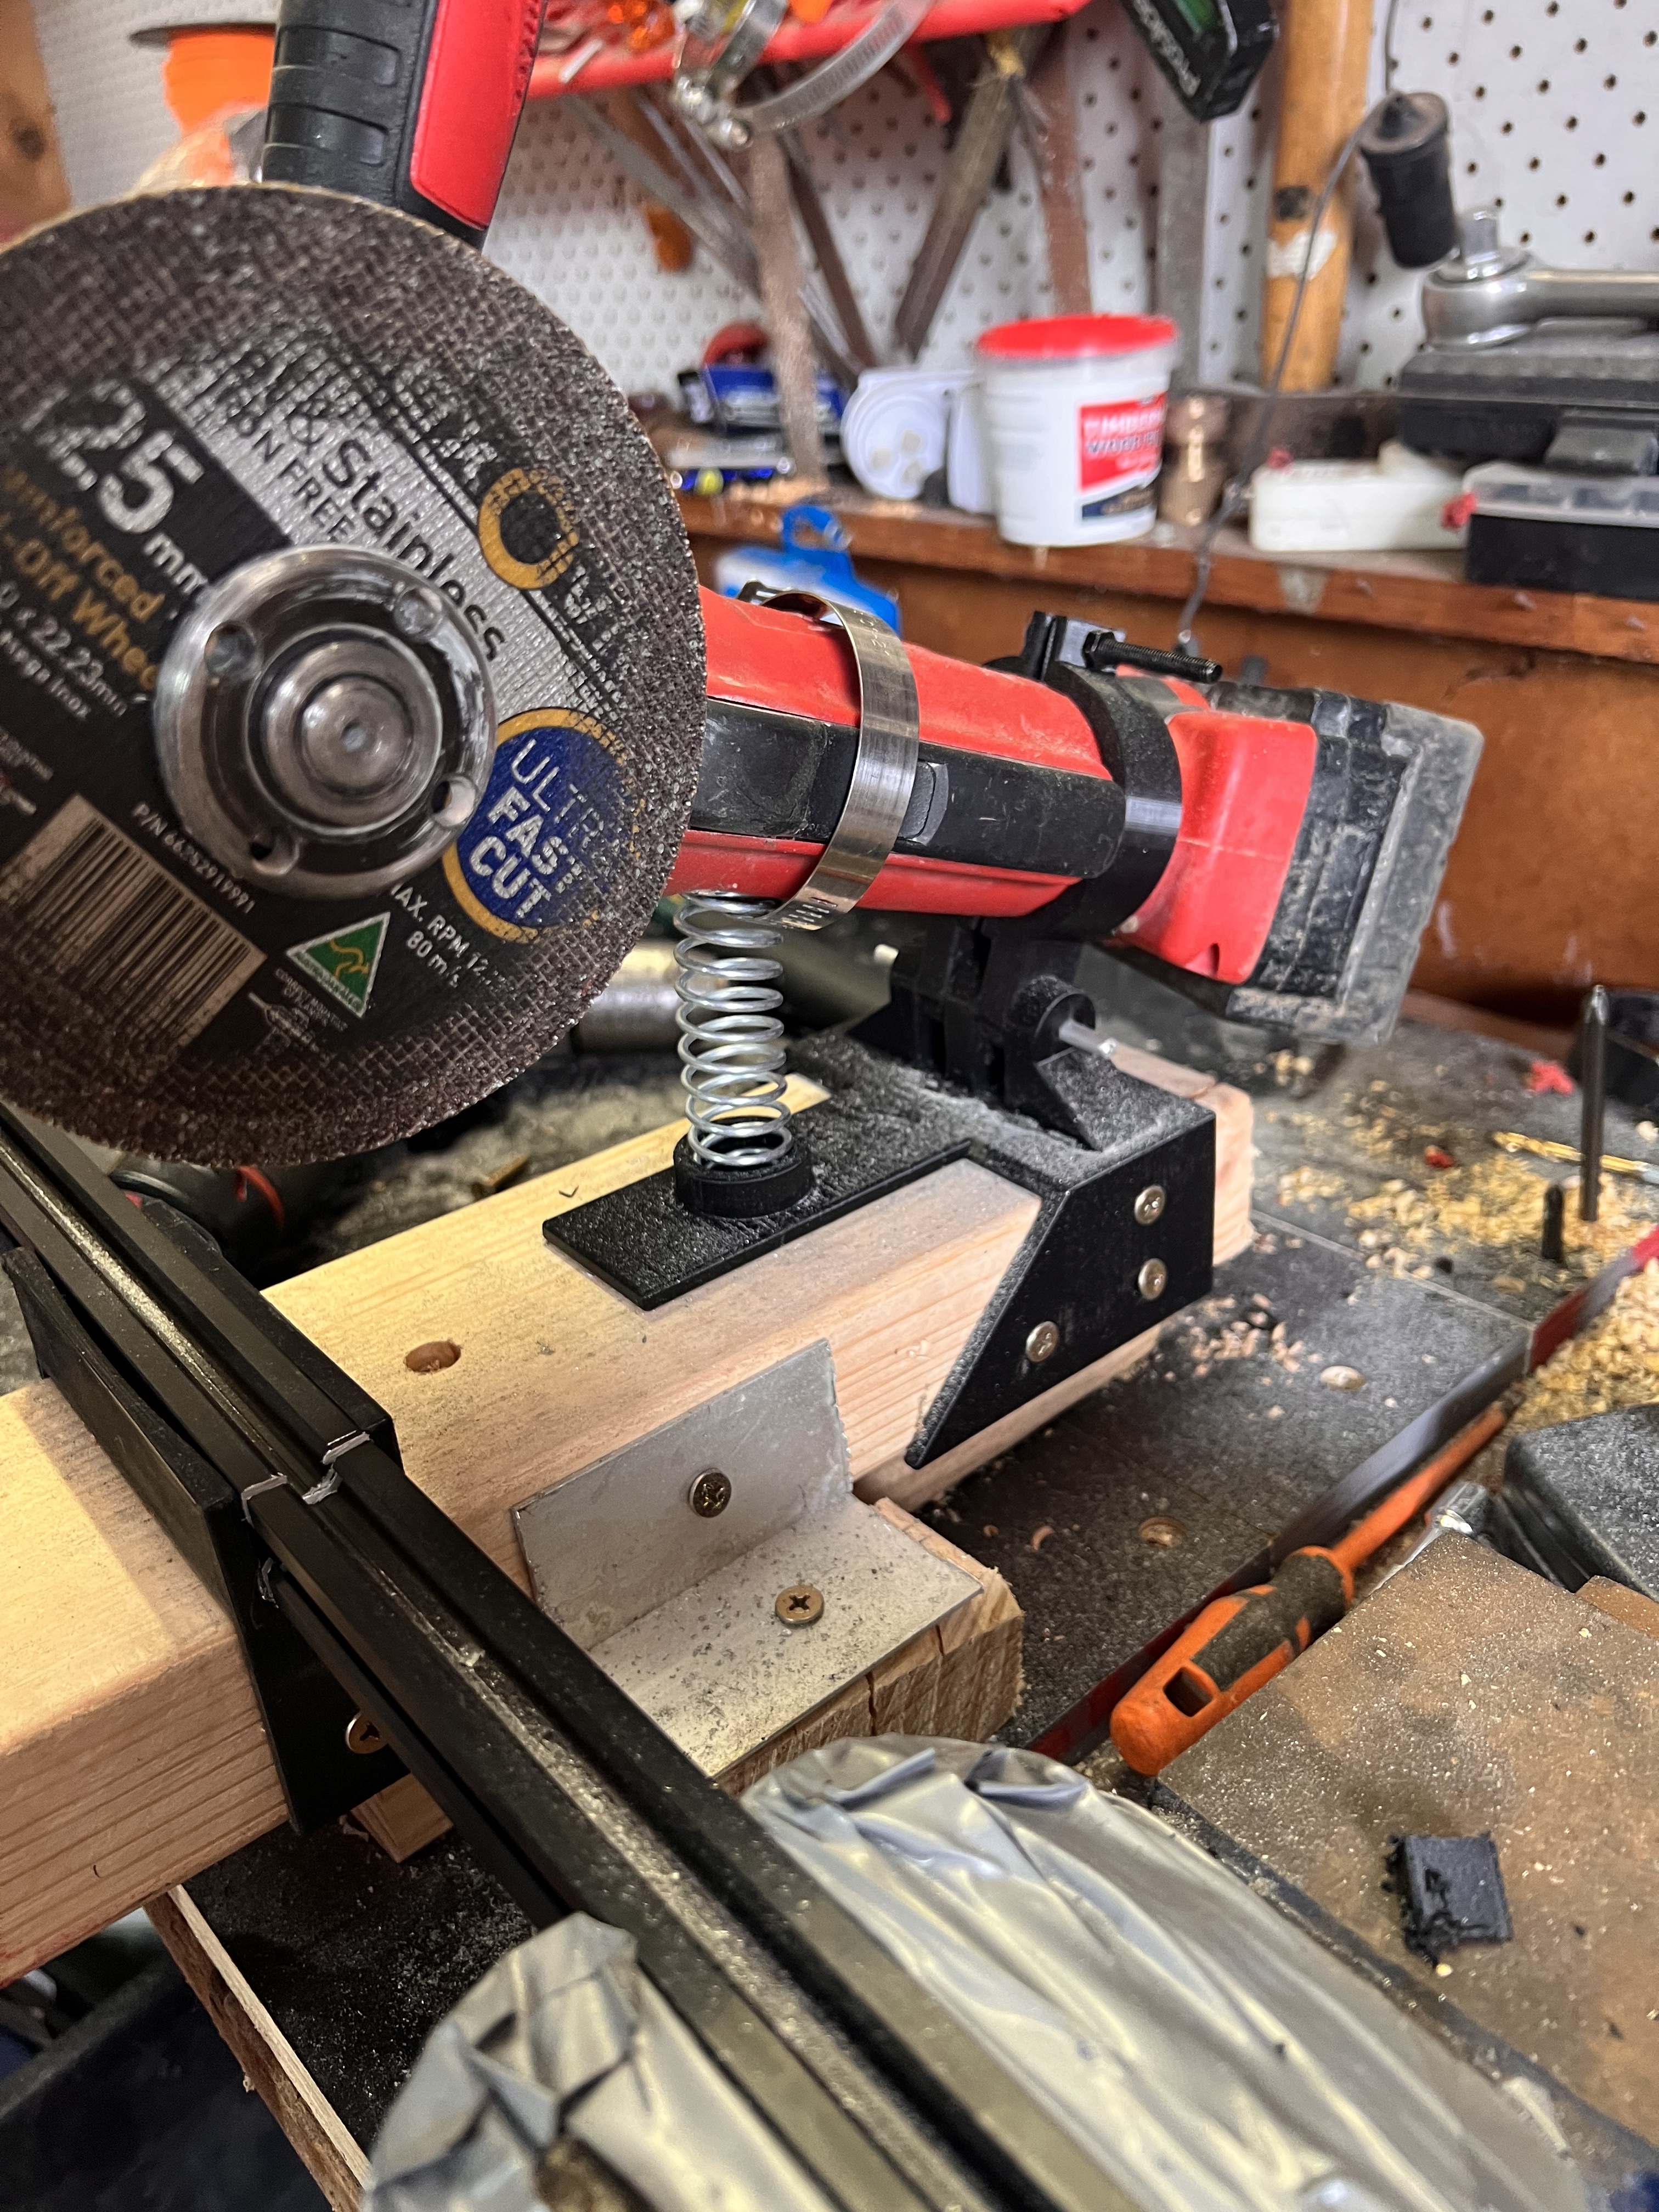 Grinder Dropsaw for 90x45mm timber and milwaukee grinder